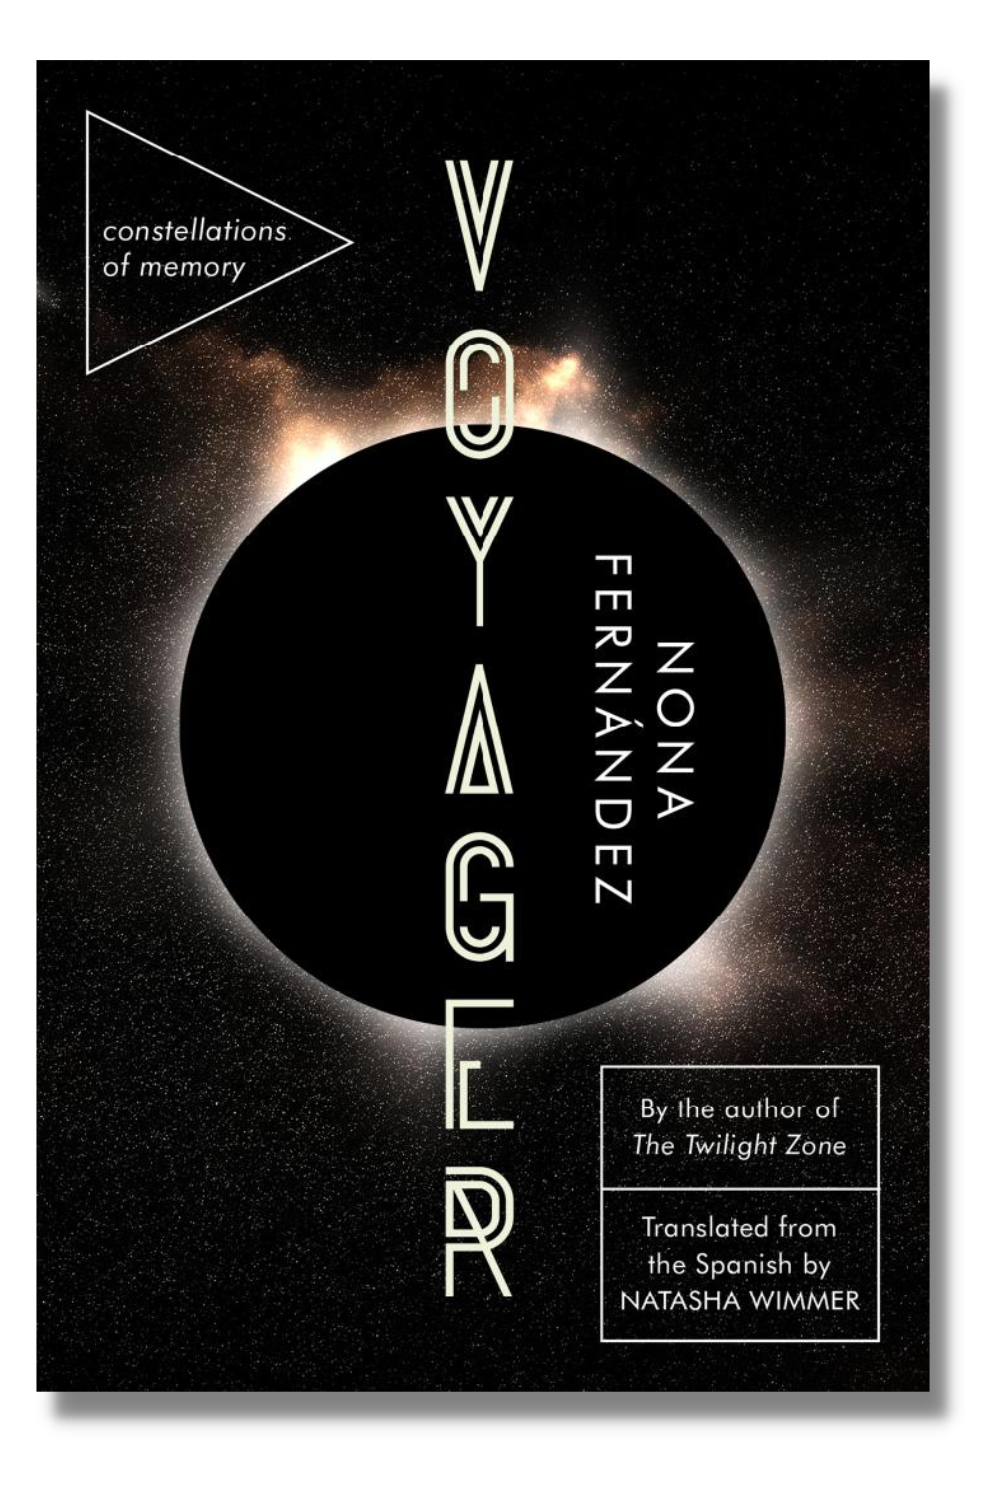 The cover of "Voyager"